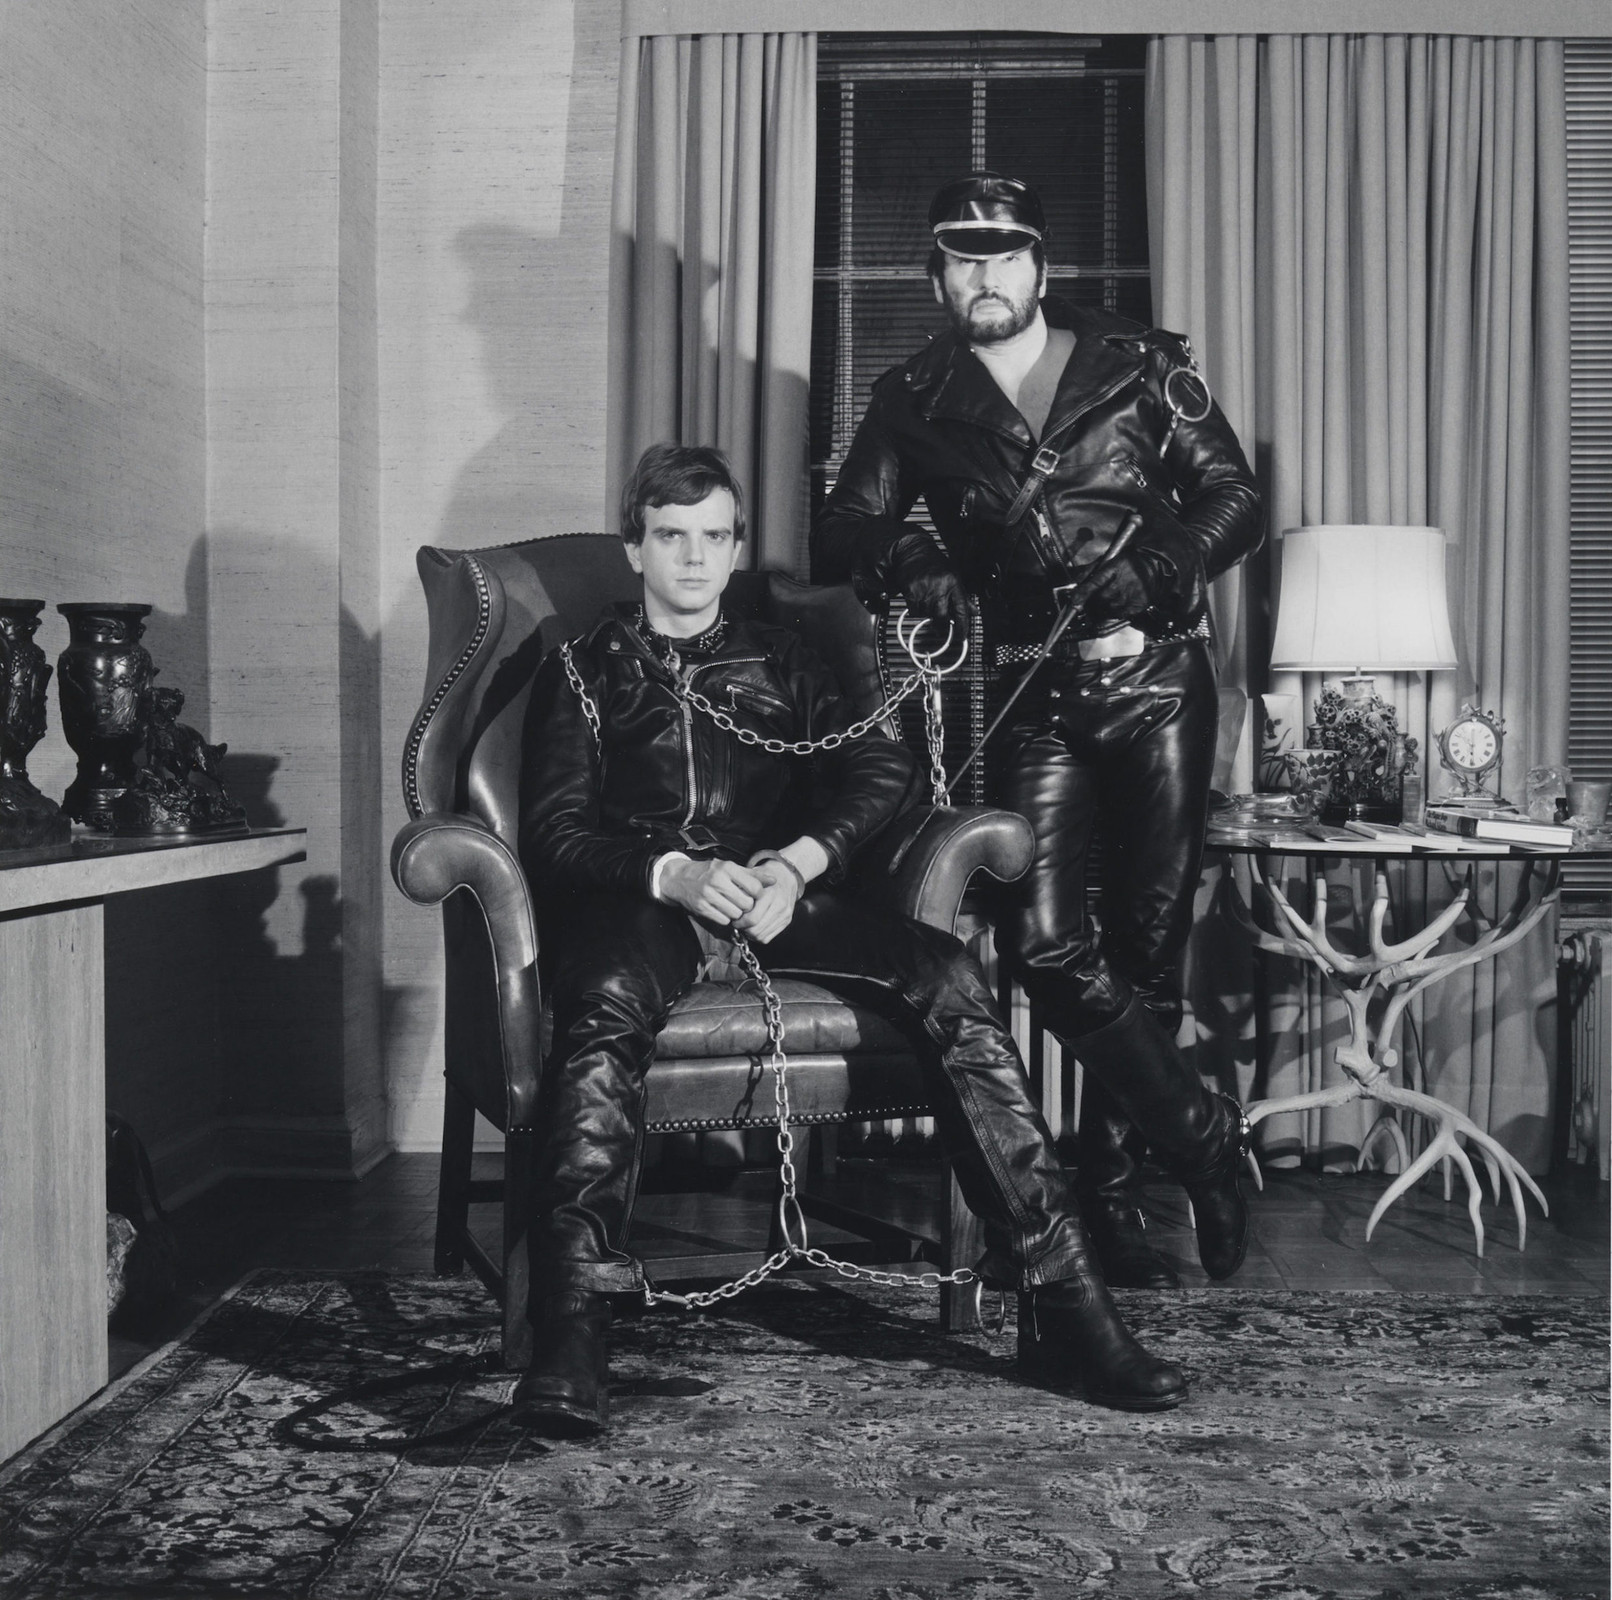 Robert Mapplethorpe. Brian Ridley and Lyle Heeter (1979)